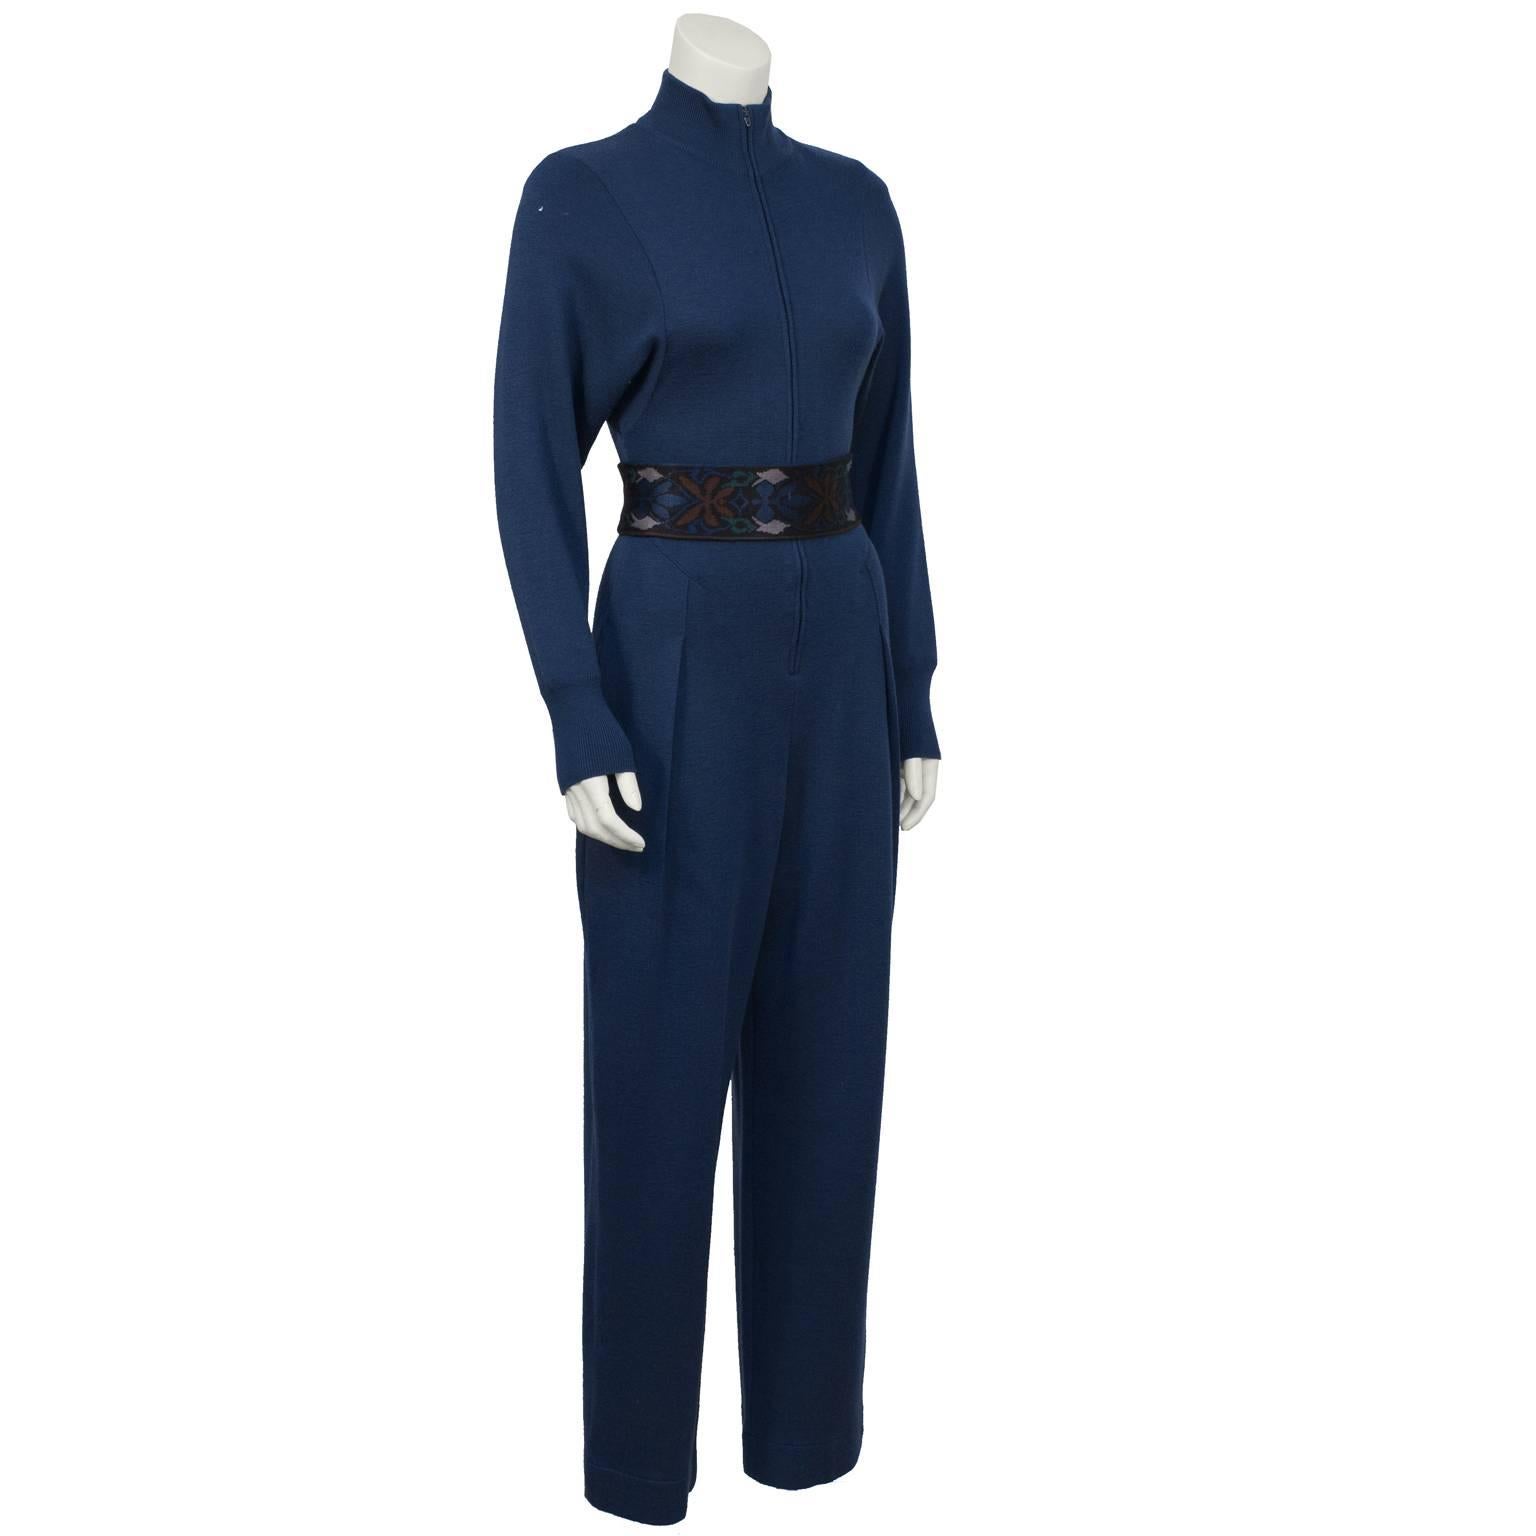 Cozy teal wool knit jumpsuit by Claude Montana from the 1980's. The jumpsuit zips up the front with a ribbed high collar, ribbed cuffs and a wide leg. Inseam pockets on the hips. Fitted at the waist, stretch belt is reversible with two different